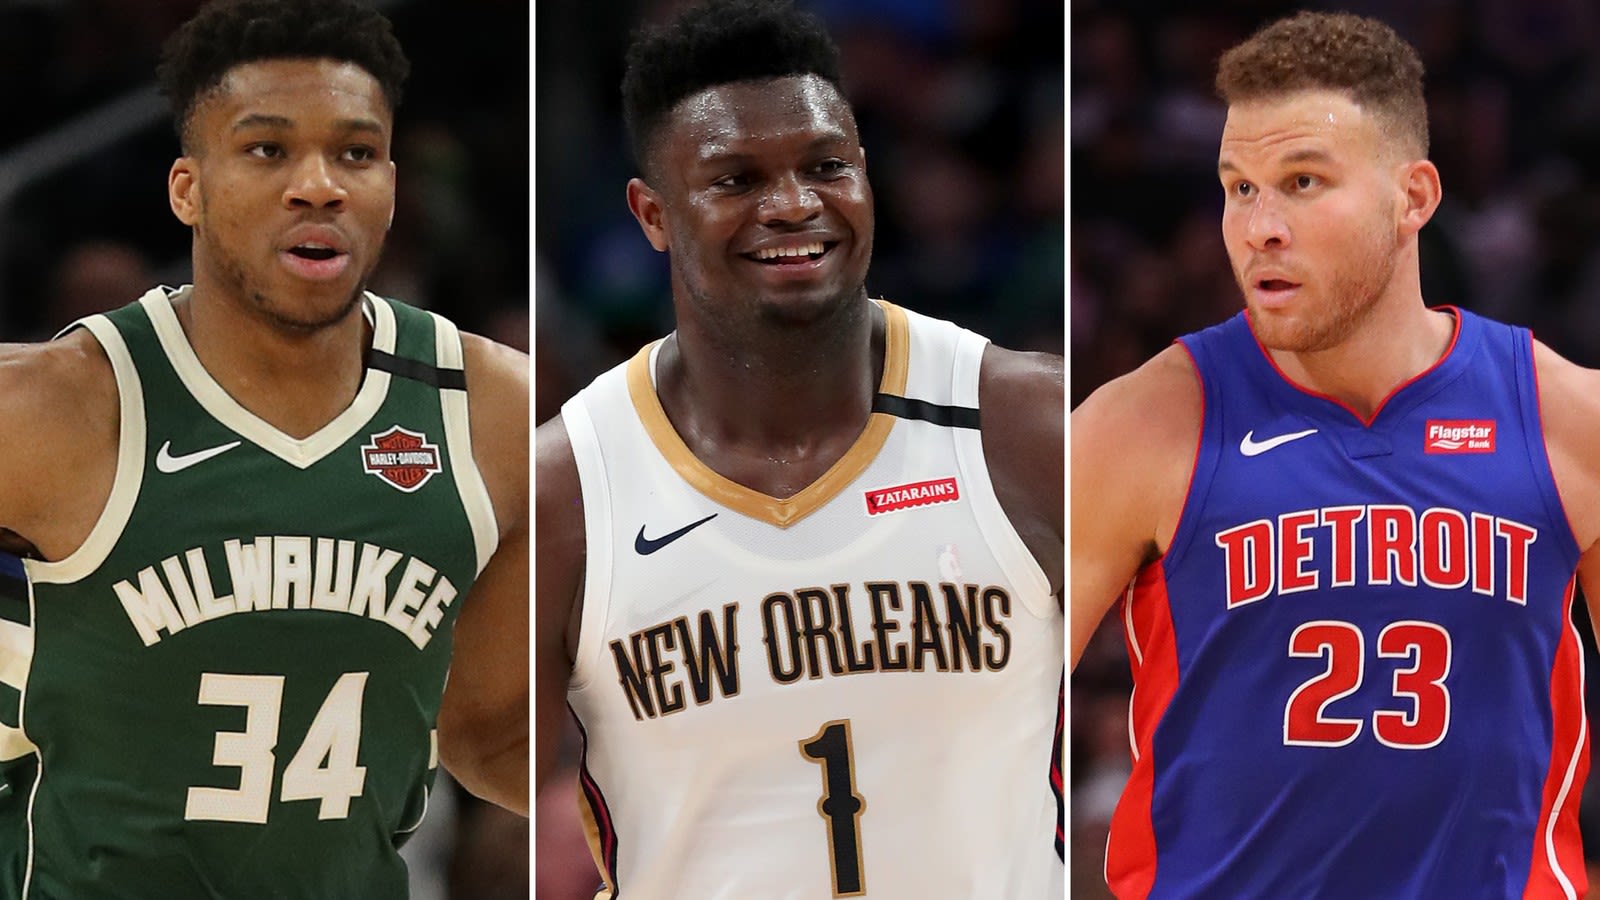 International players have made a world of difference in the NBA